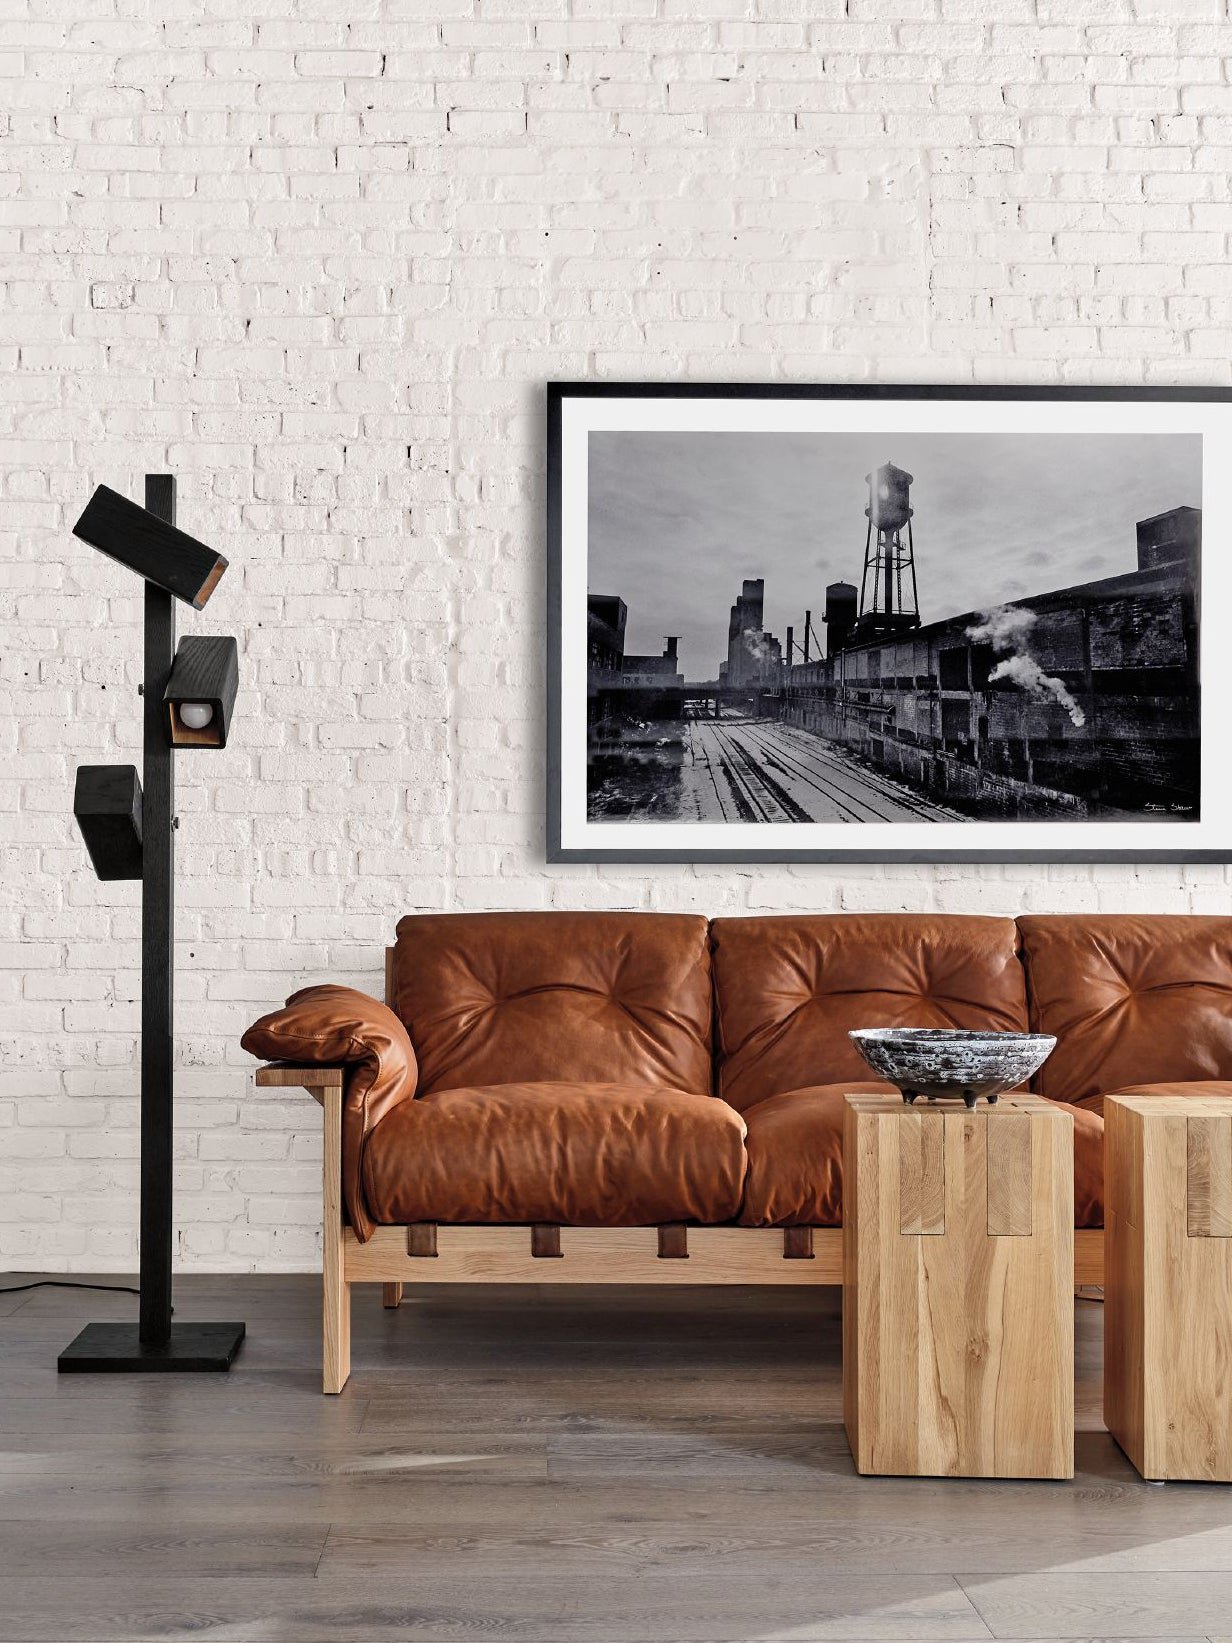 Leather Sofas That Won’t Make It Look Like You Live in a Brooklyn Bachelor Pad